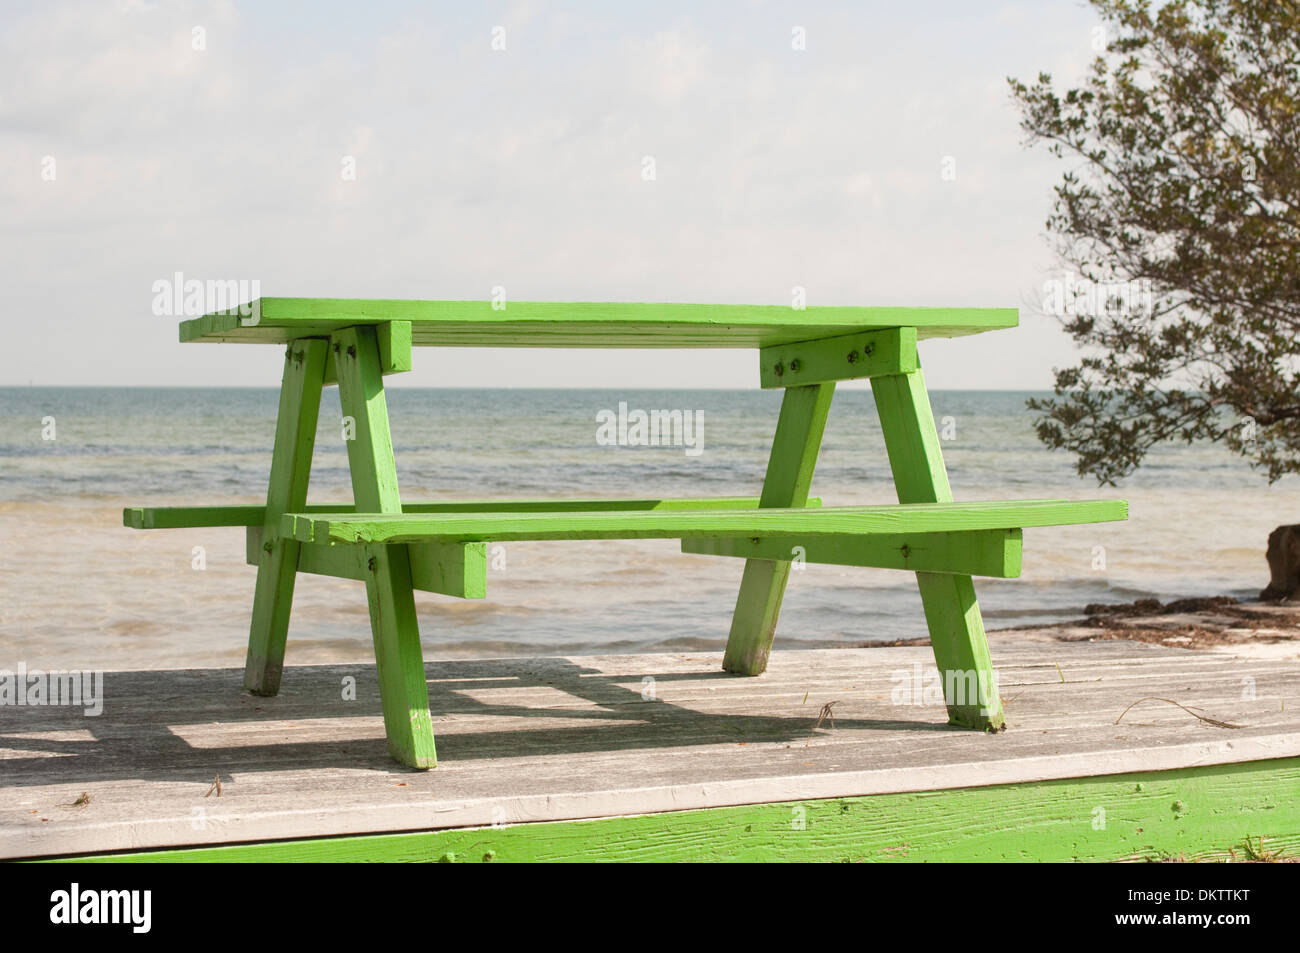 A bright green picnic table overlooks the beach. Stock Photo